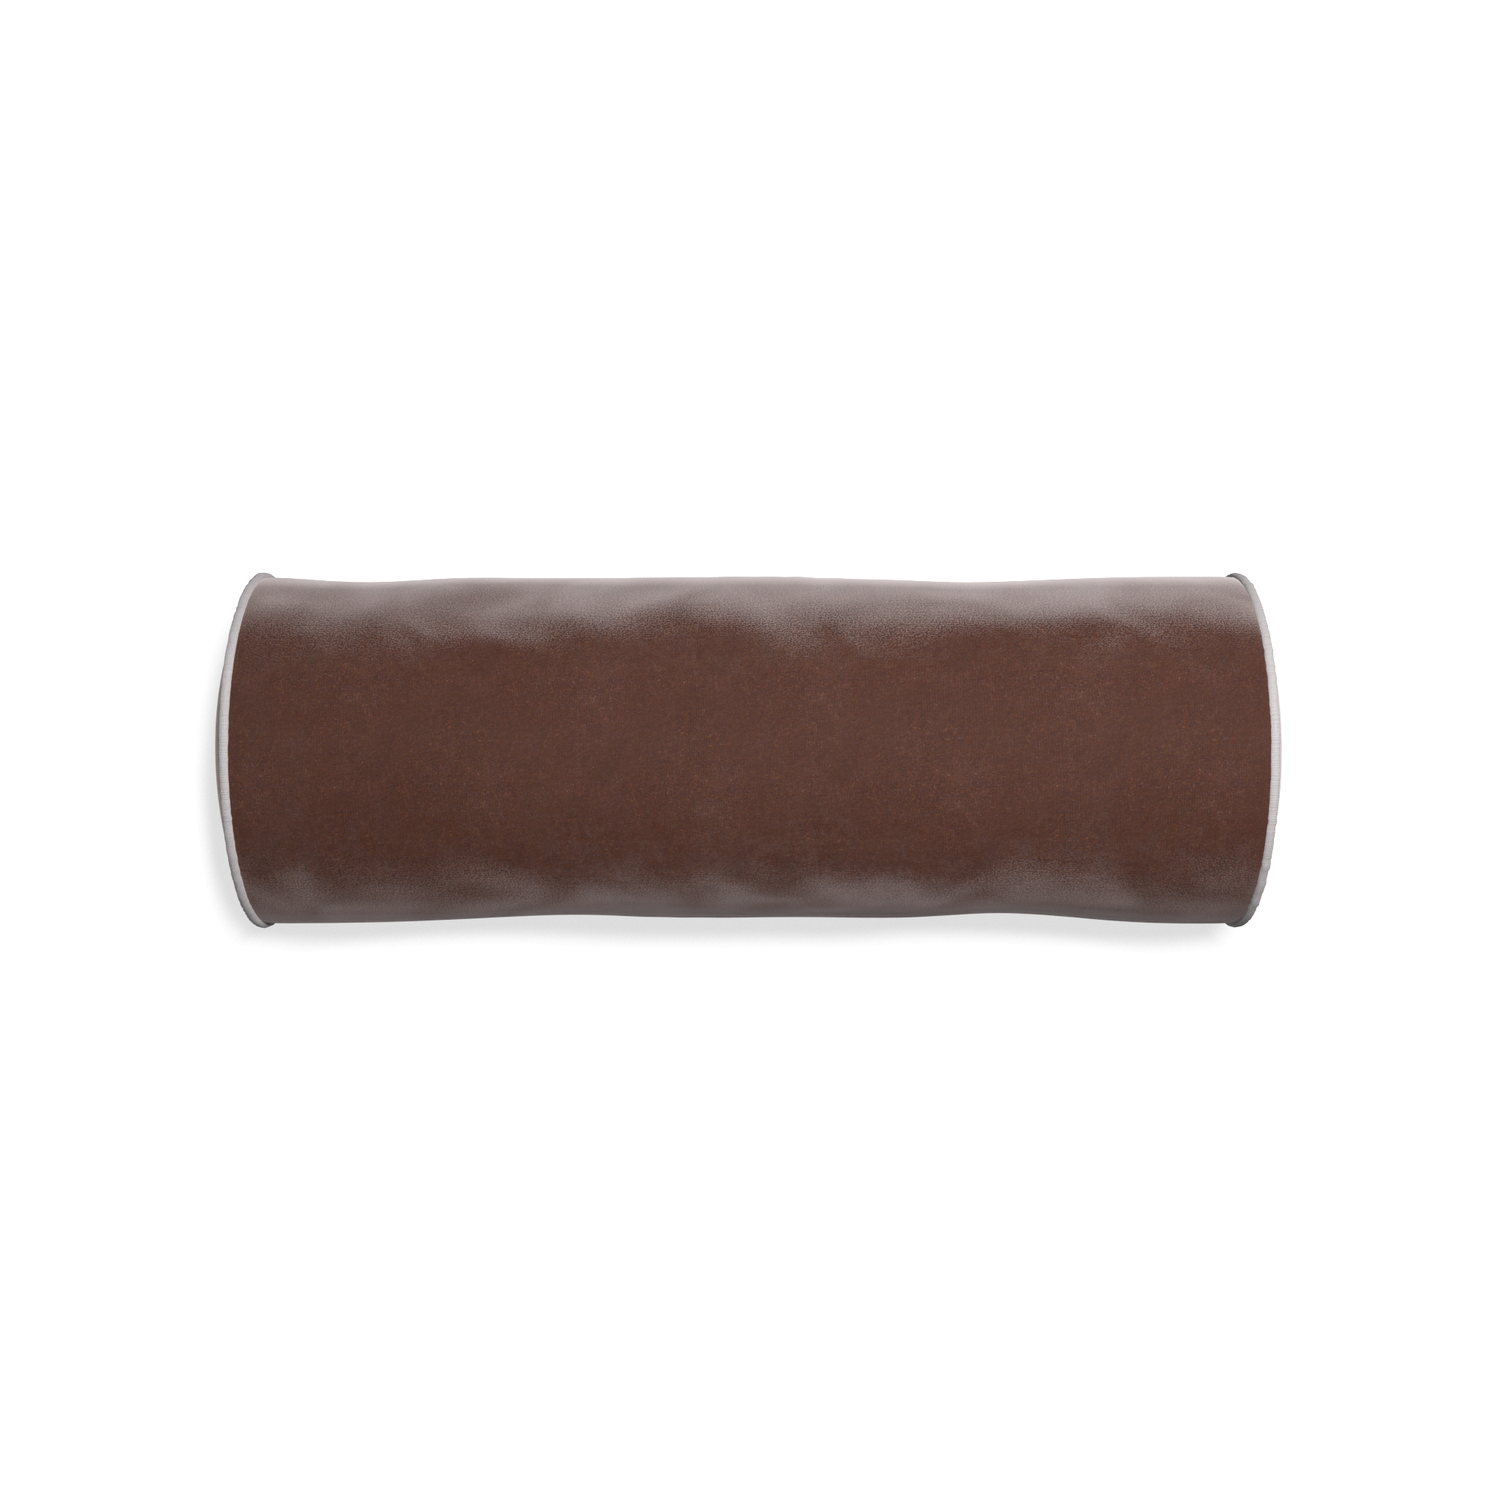 bolster brown velvet pillow with grey piping